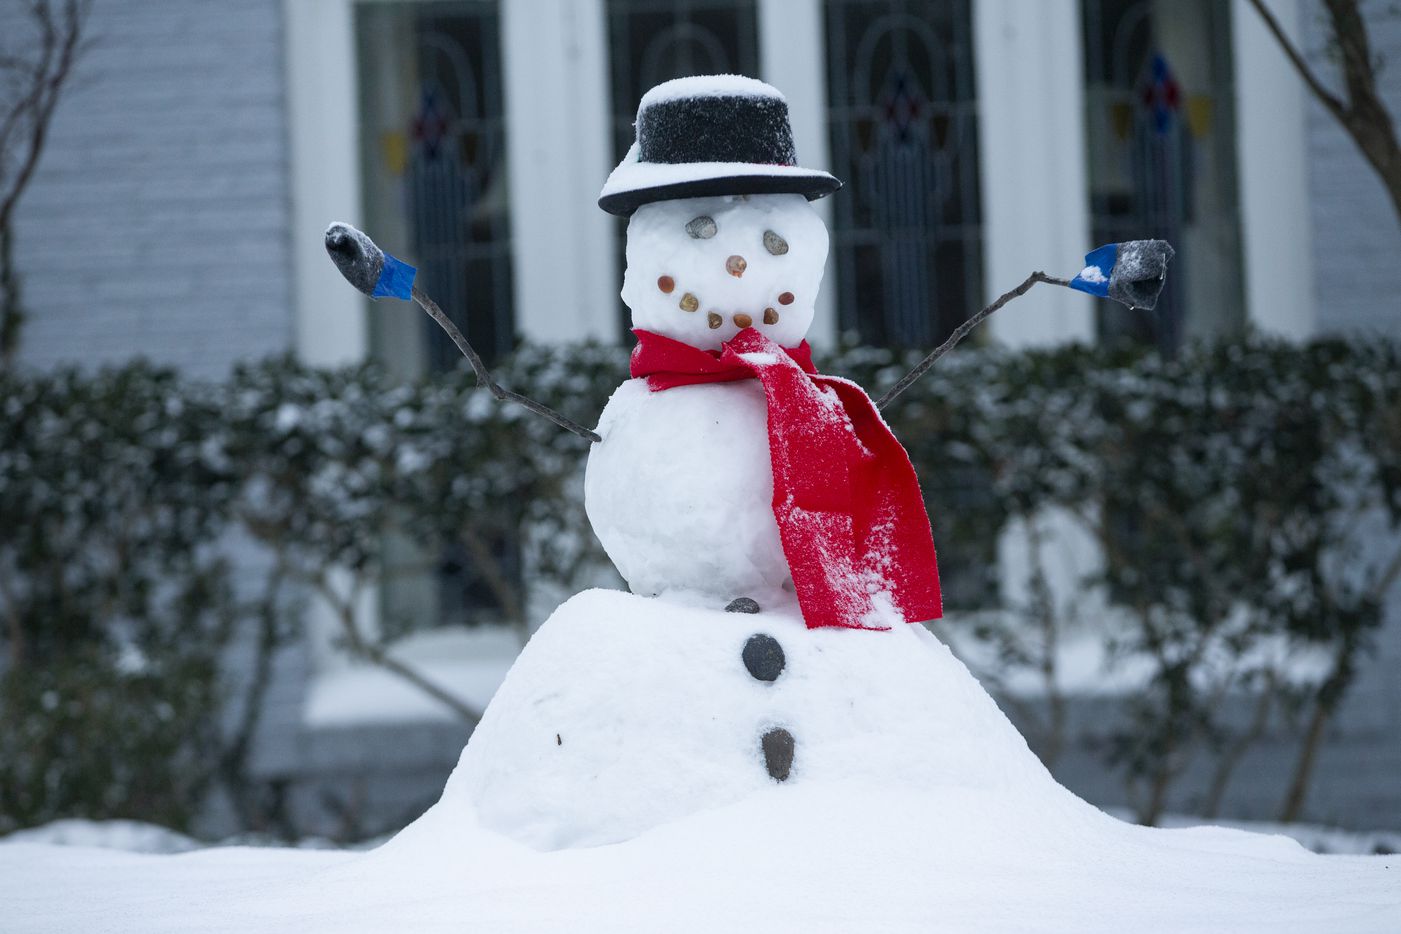 A snowman in Lower Greenville sits with fresh snow on its head in Dallas on Wednesday, Feb. 17, 2021. Millions of Texans have lost power amid this record-breaking winter storm.